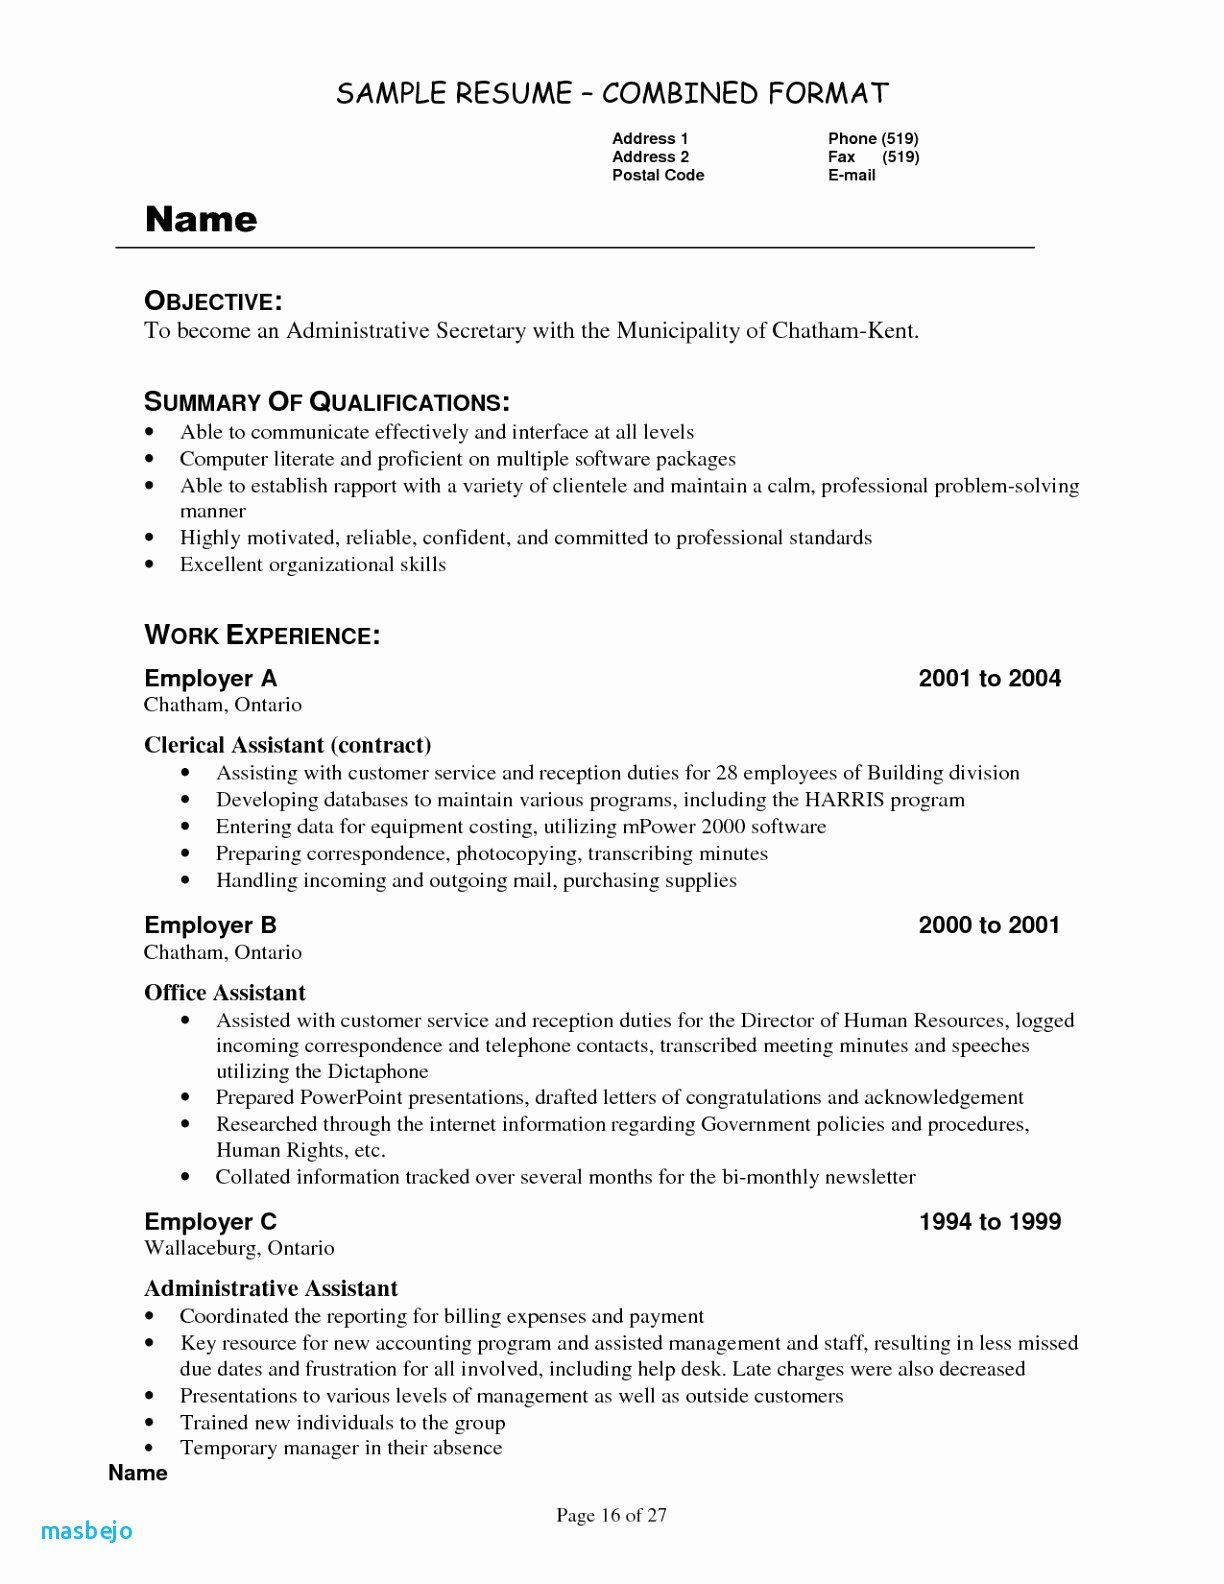 Resume Templates for Front Desk Receptionist Front Desk Receptionist Resume Elegant Lifeaftermarried Just …